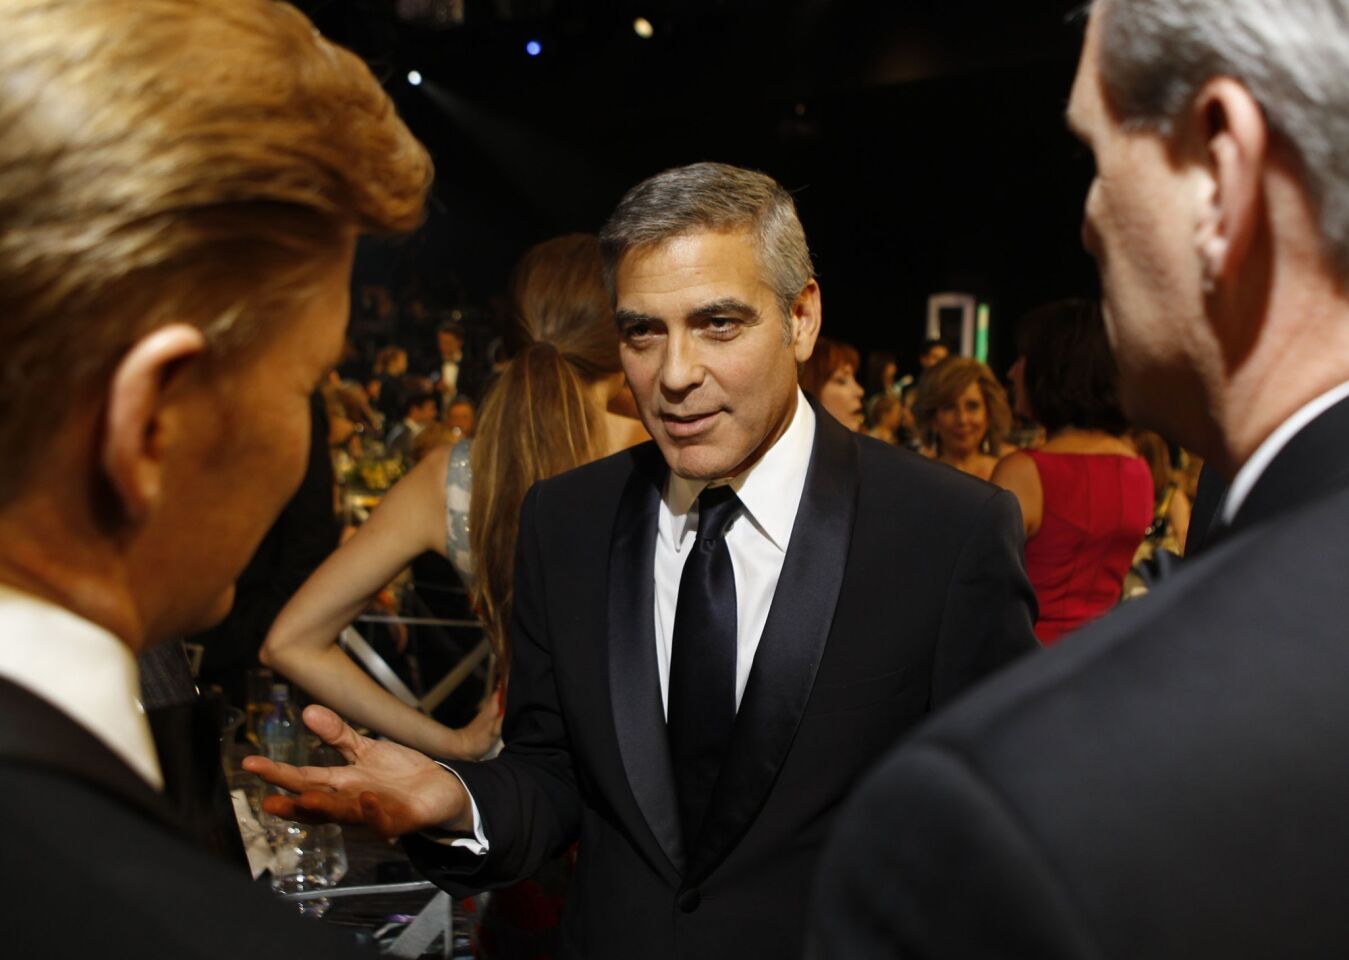 Celeb:George Clooney Company: Maysville Pictures Select projects: "Rock Star" and "Fail Safe"